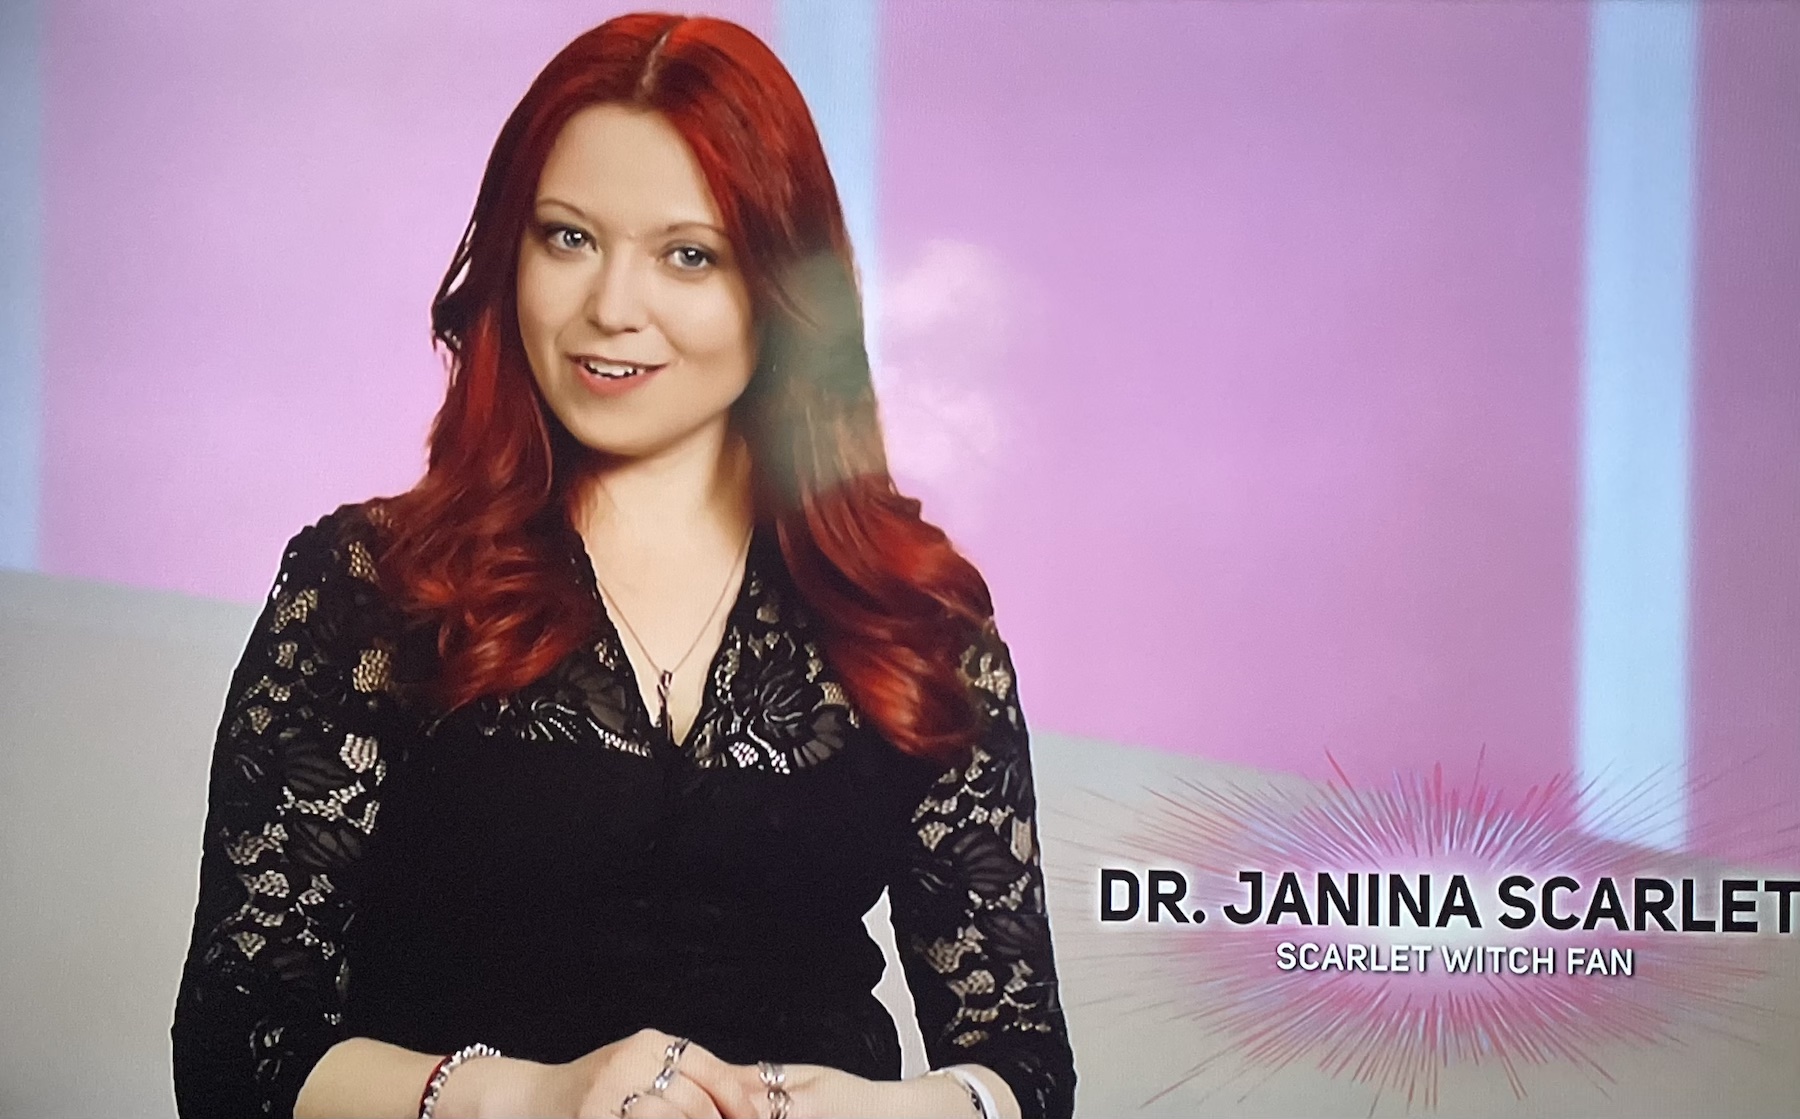 Still image of Dr. Janina Scarlet from her appearance on the Marvel TV show MPower